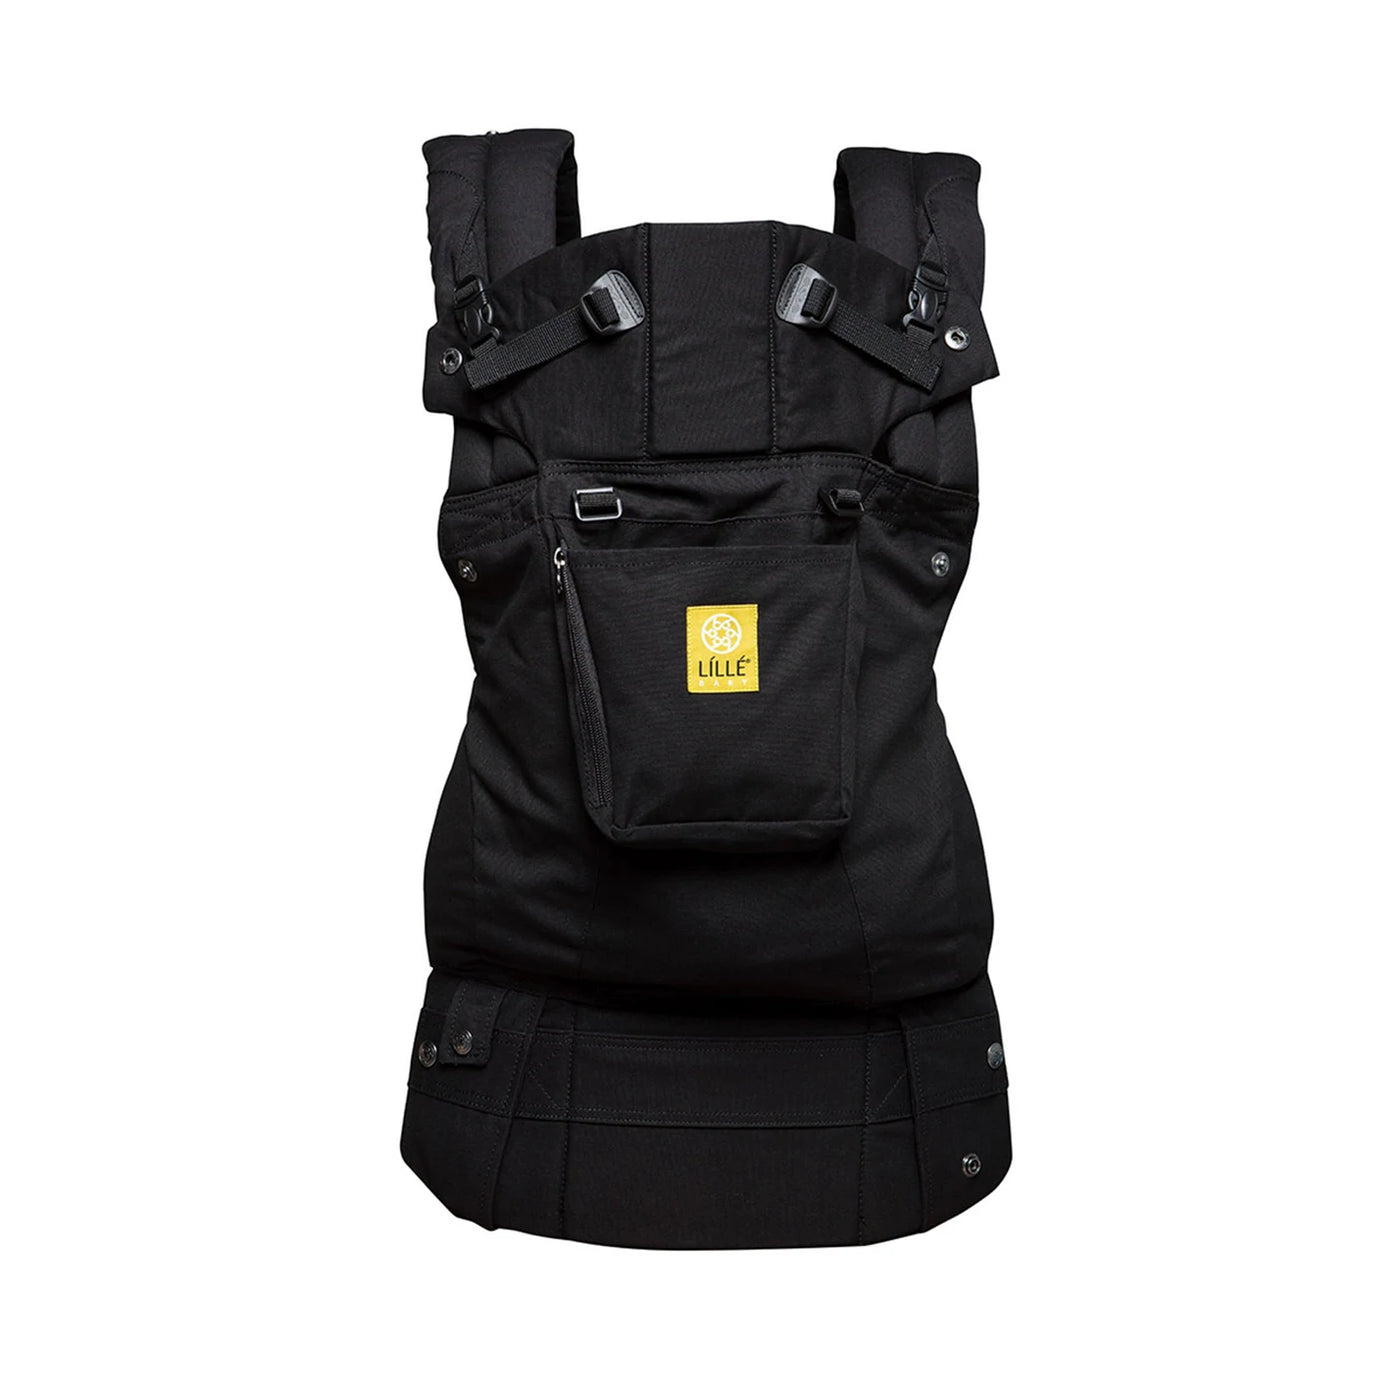 Complete Airflow Baby Carrier